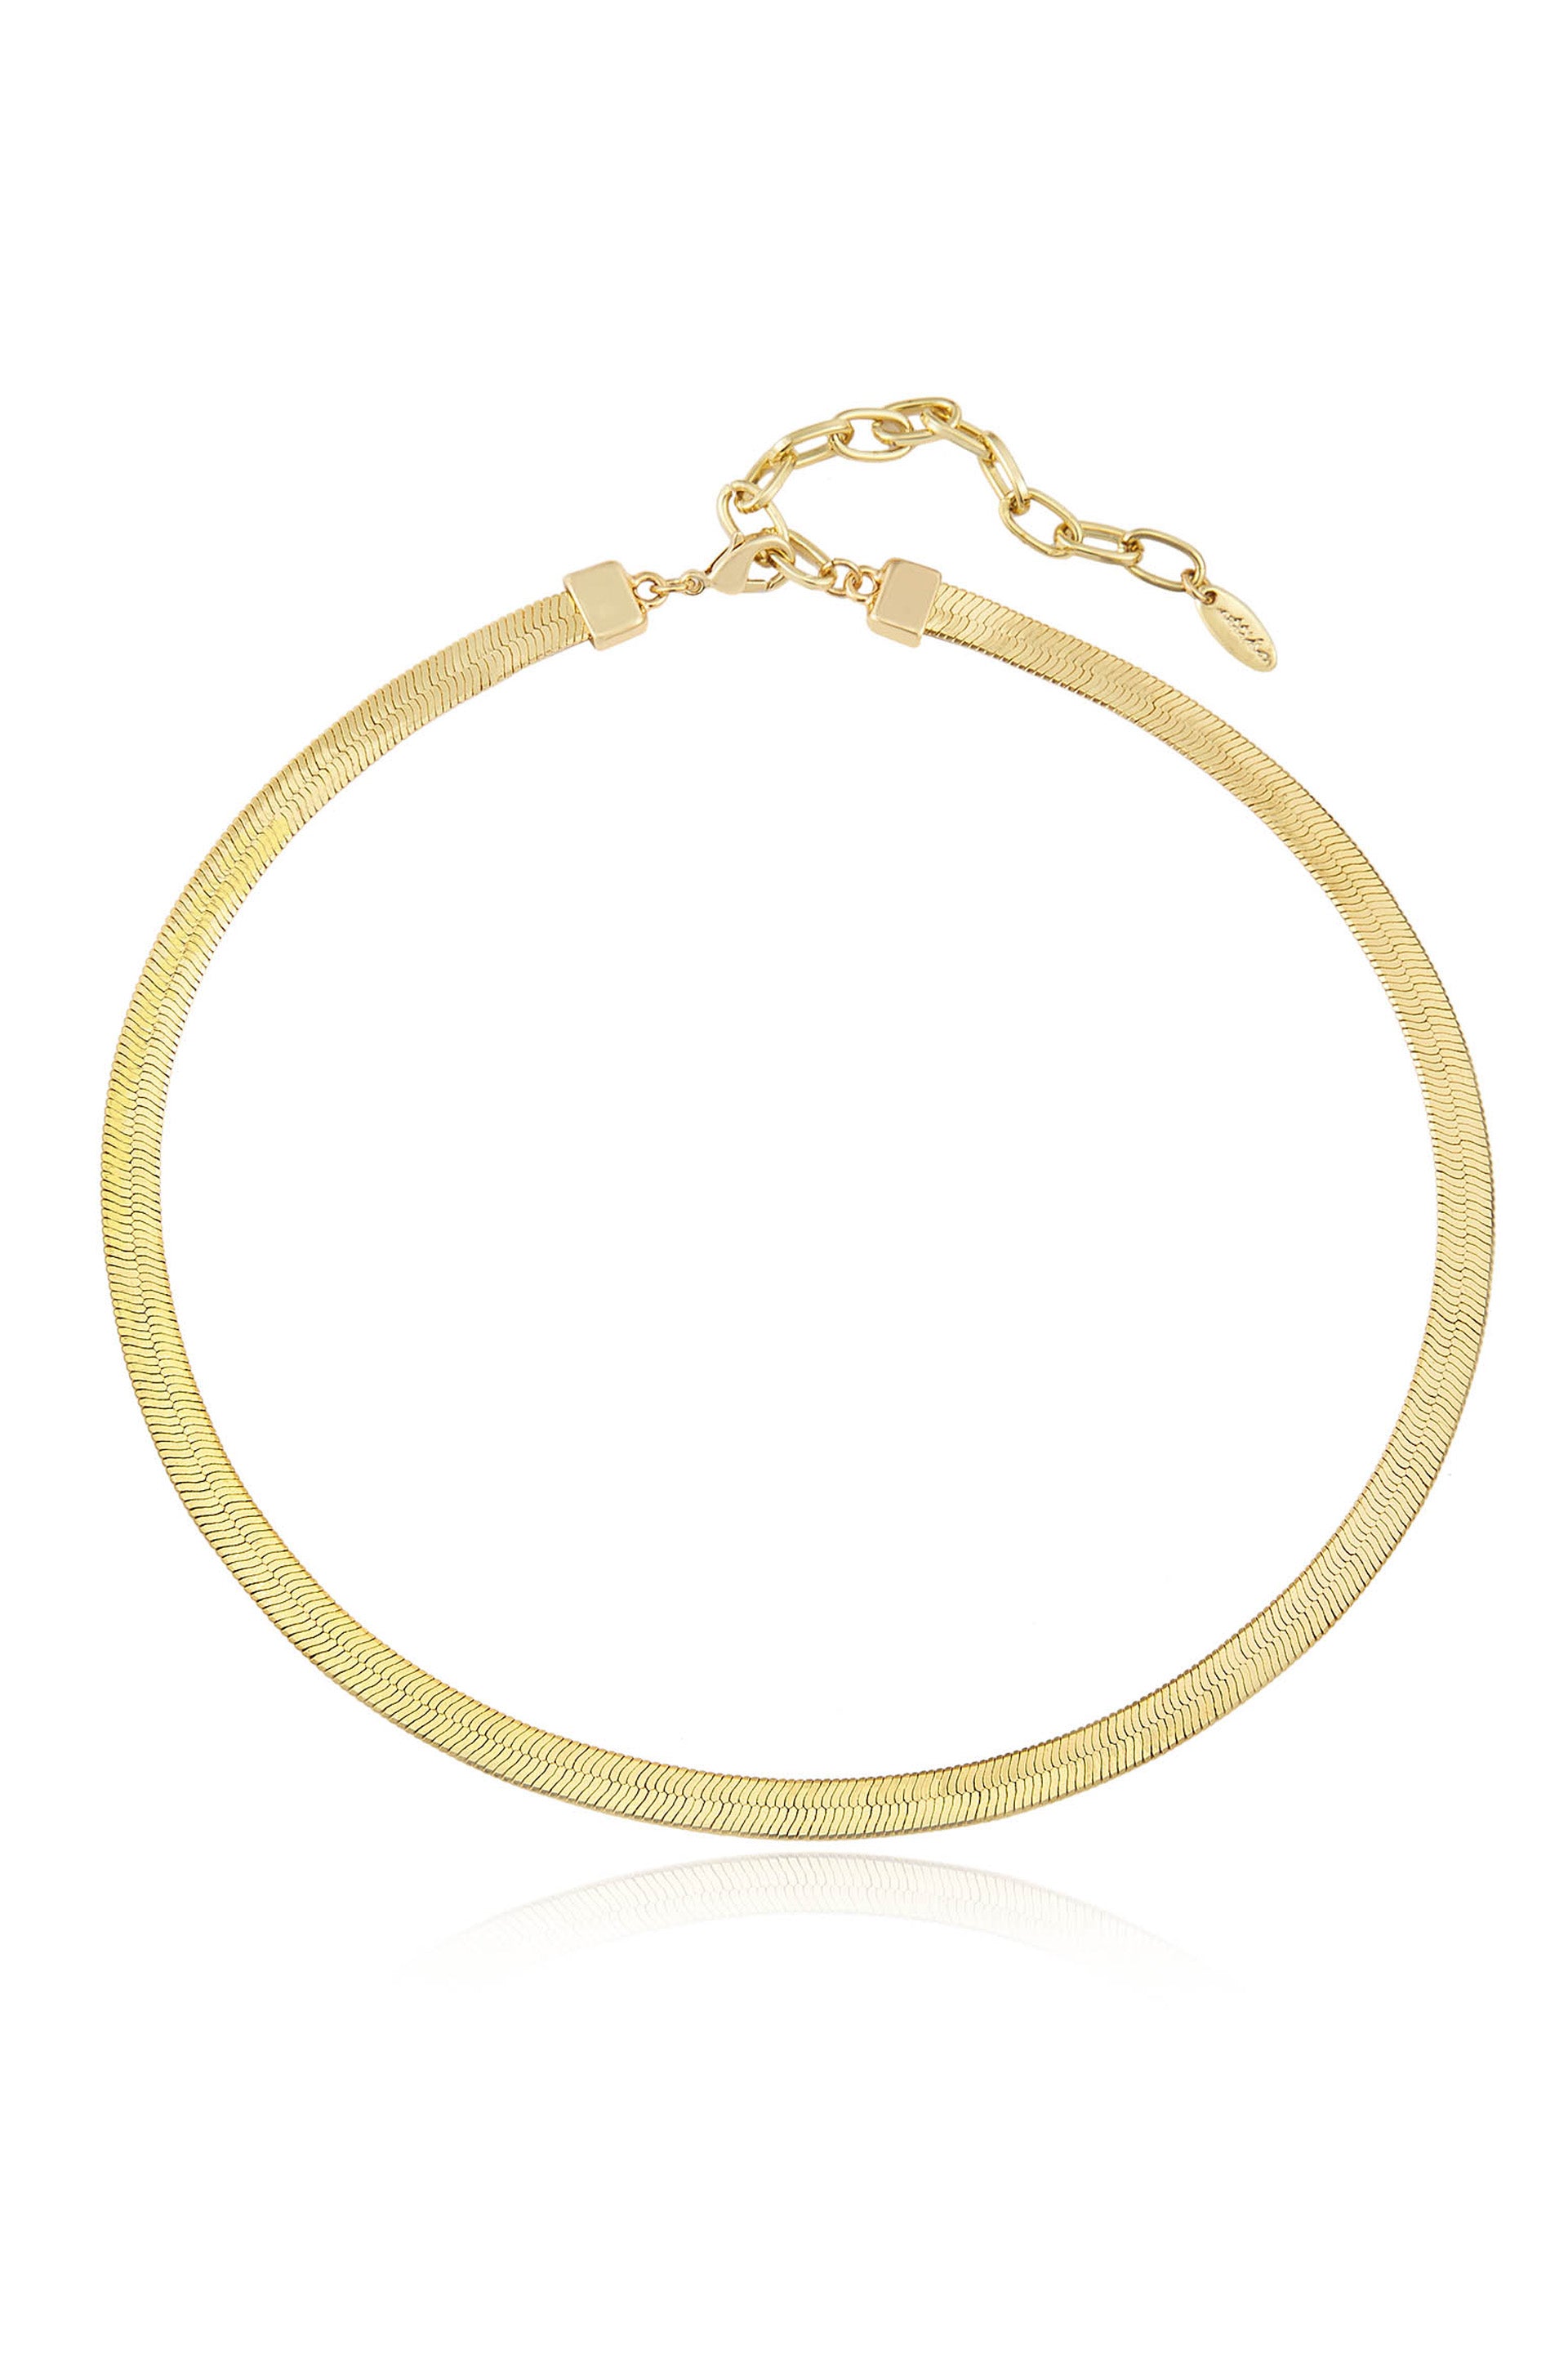 Brooklyn Flat 18k Gold Plated Snake Chain Necklace